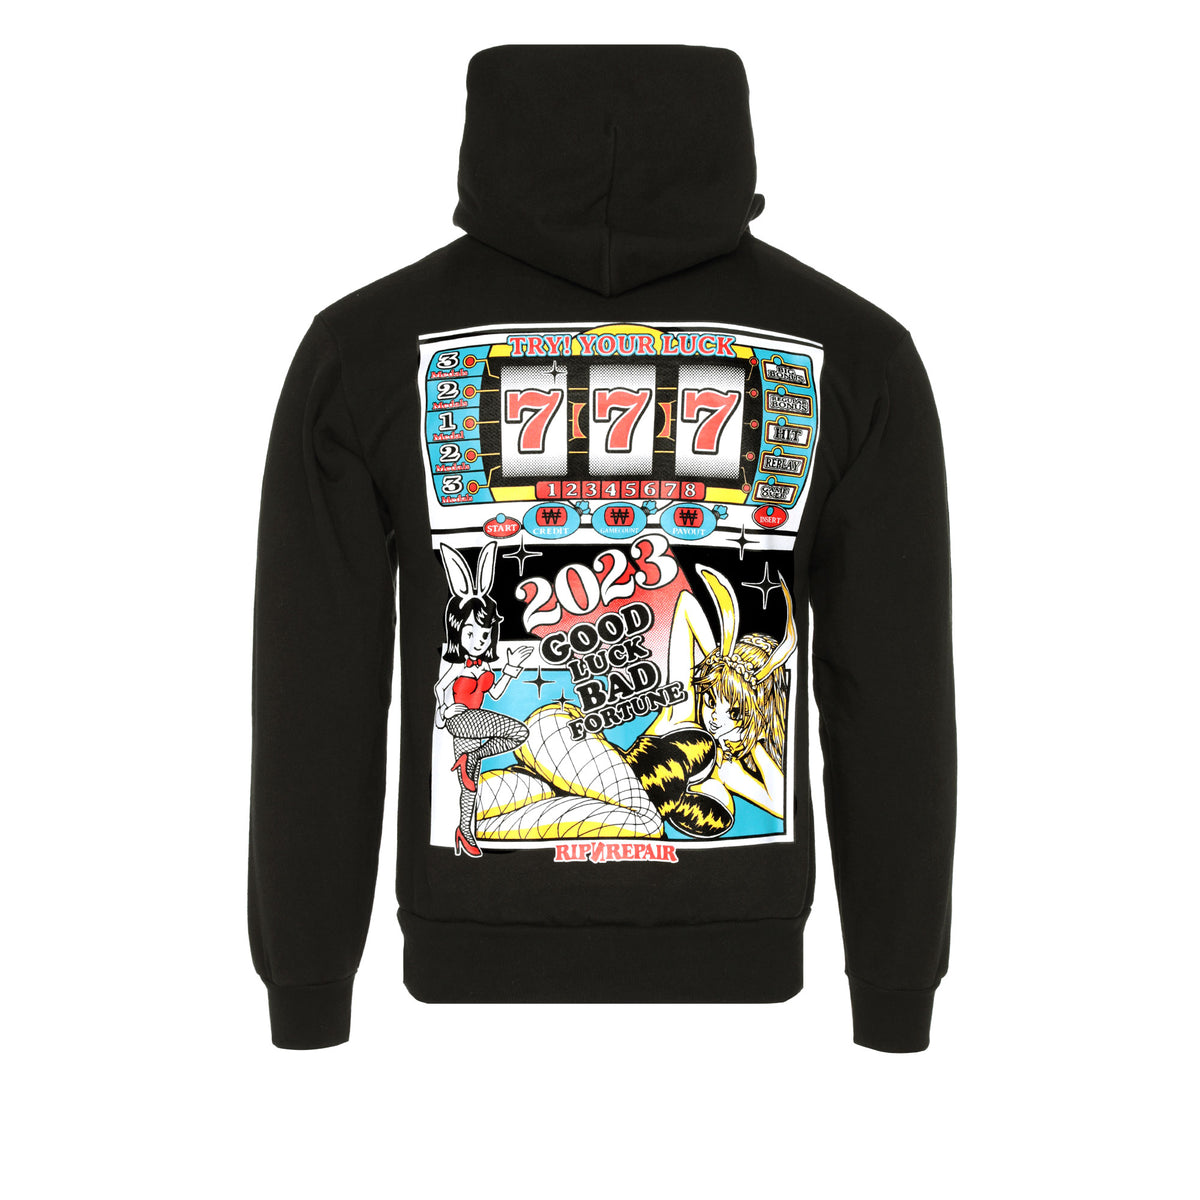 Rip N' Repair "Wish Me Luck" Men's Pullover Hoodie - SIZE Boutique